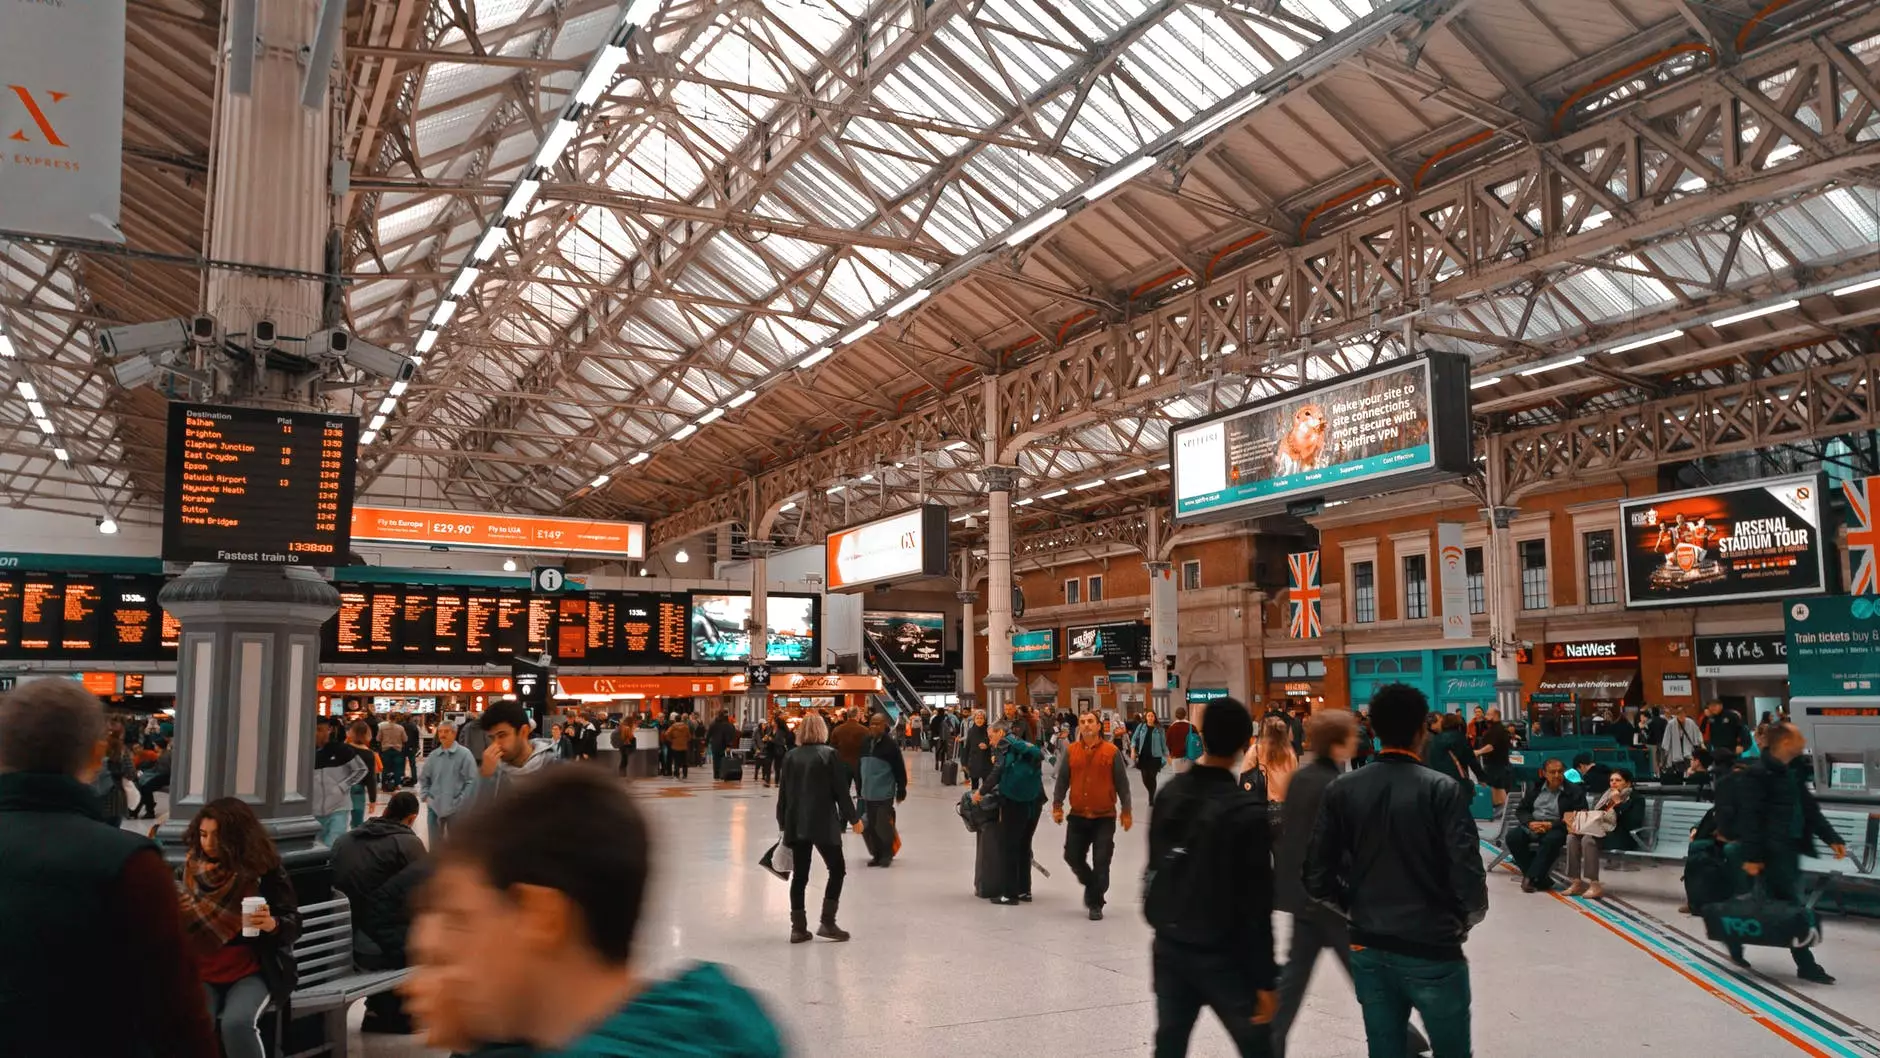 Unions have warned it could lead to overcrowding in train stations.